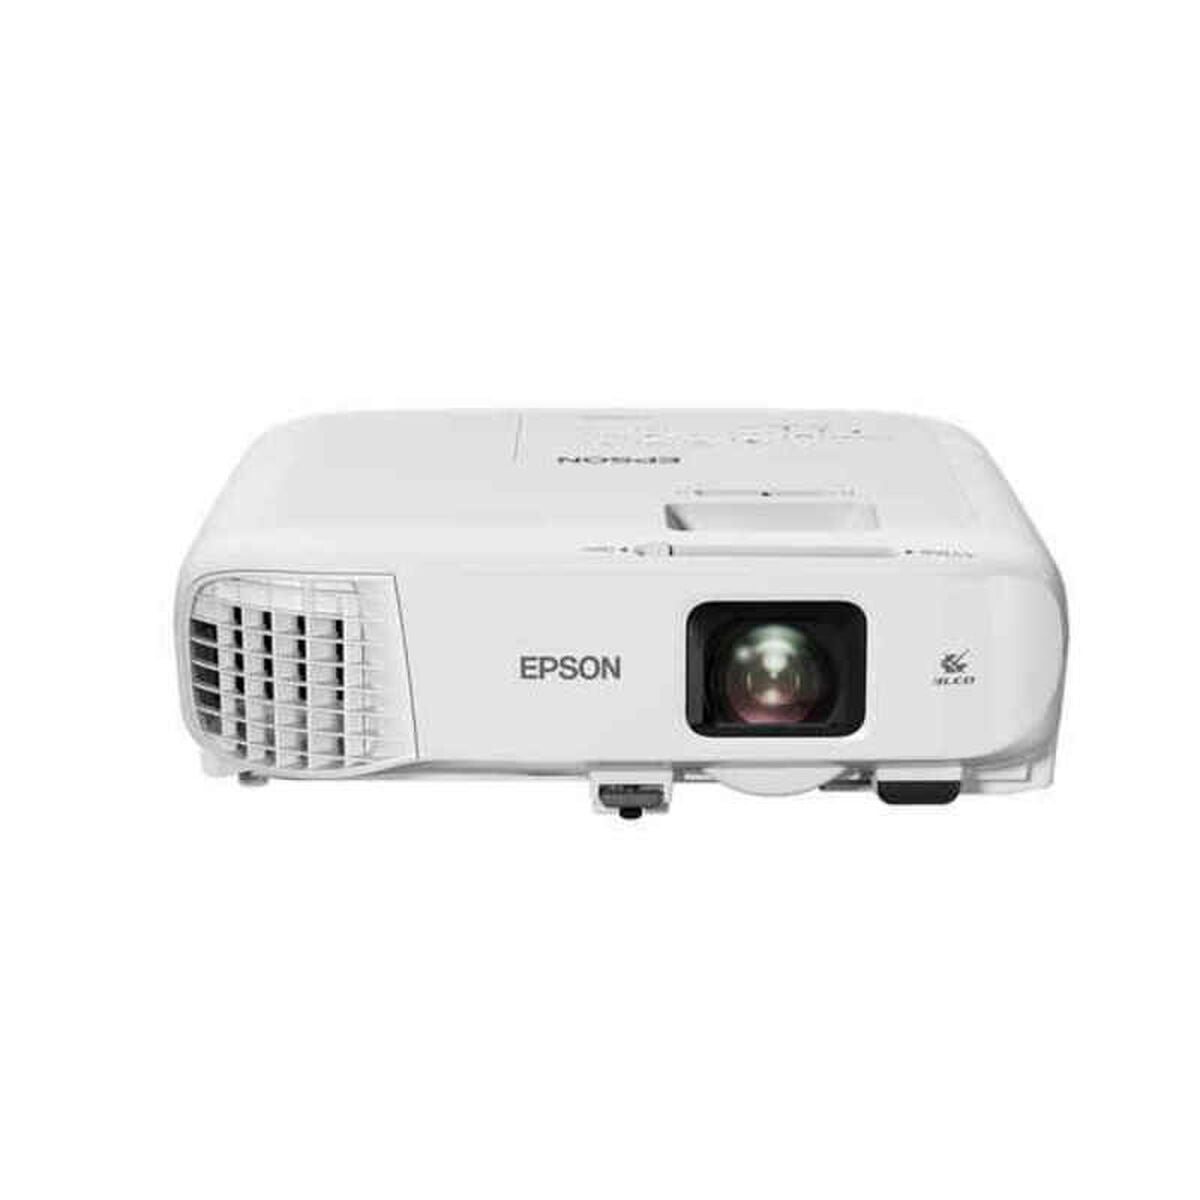 Projector Epson V11H987040 4200 Lm White WXGA 1080 px, Epson, Electronics, TV, Video and home cinema, projector-epson-v11h987040-4200-lm-white-wxga-1080-px, Brand_Epson, category-reference-2609, category-reference-2642, category-reference-2947, category-reference-t-18805, category-reference-t-19653, cinema and television, computers / peripherals, Condition_NEW, entertainment, office, Price_900 - 1000, RiotNook